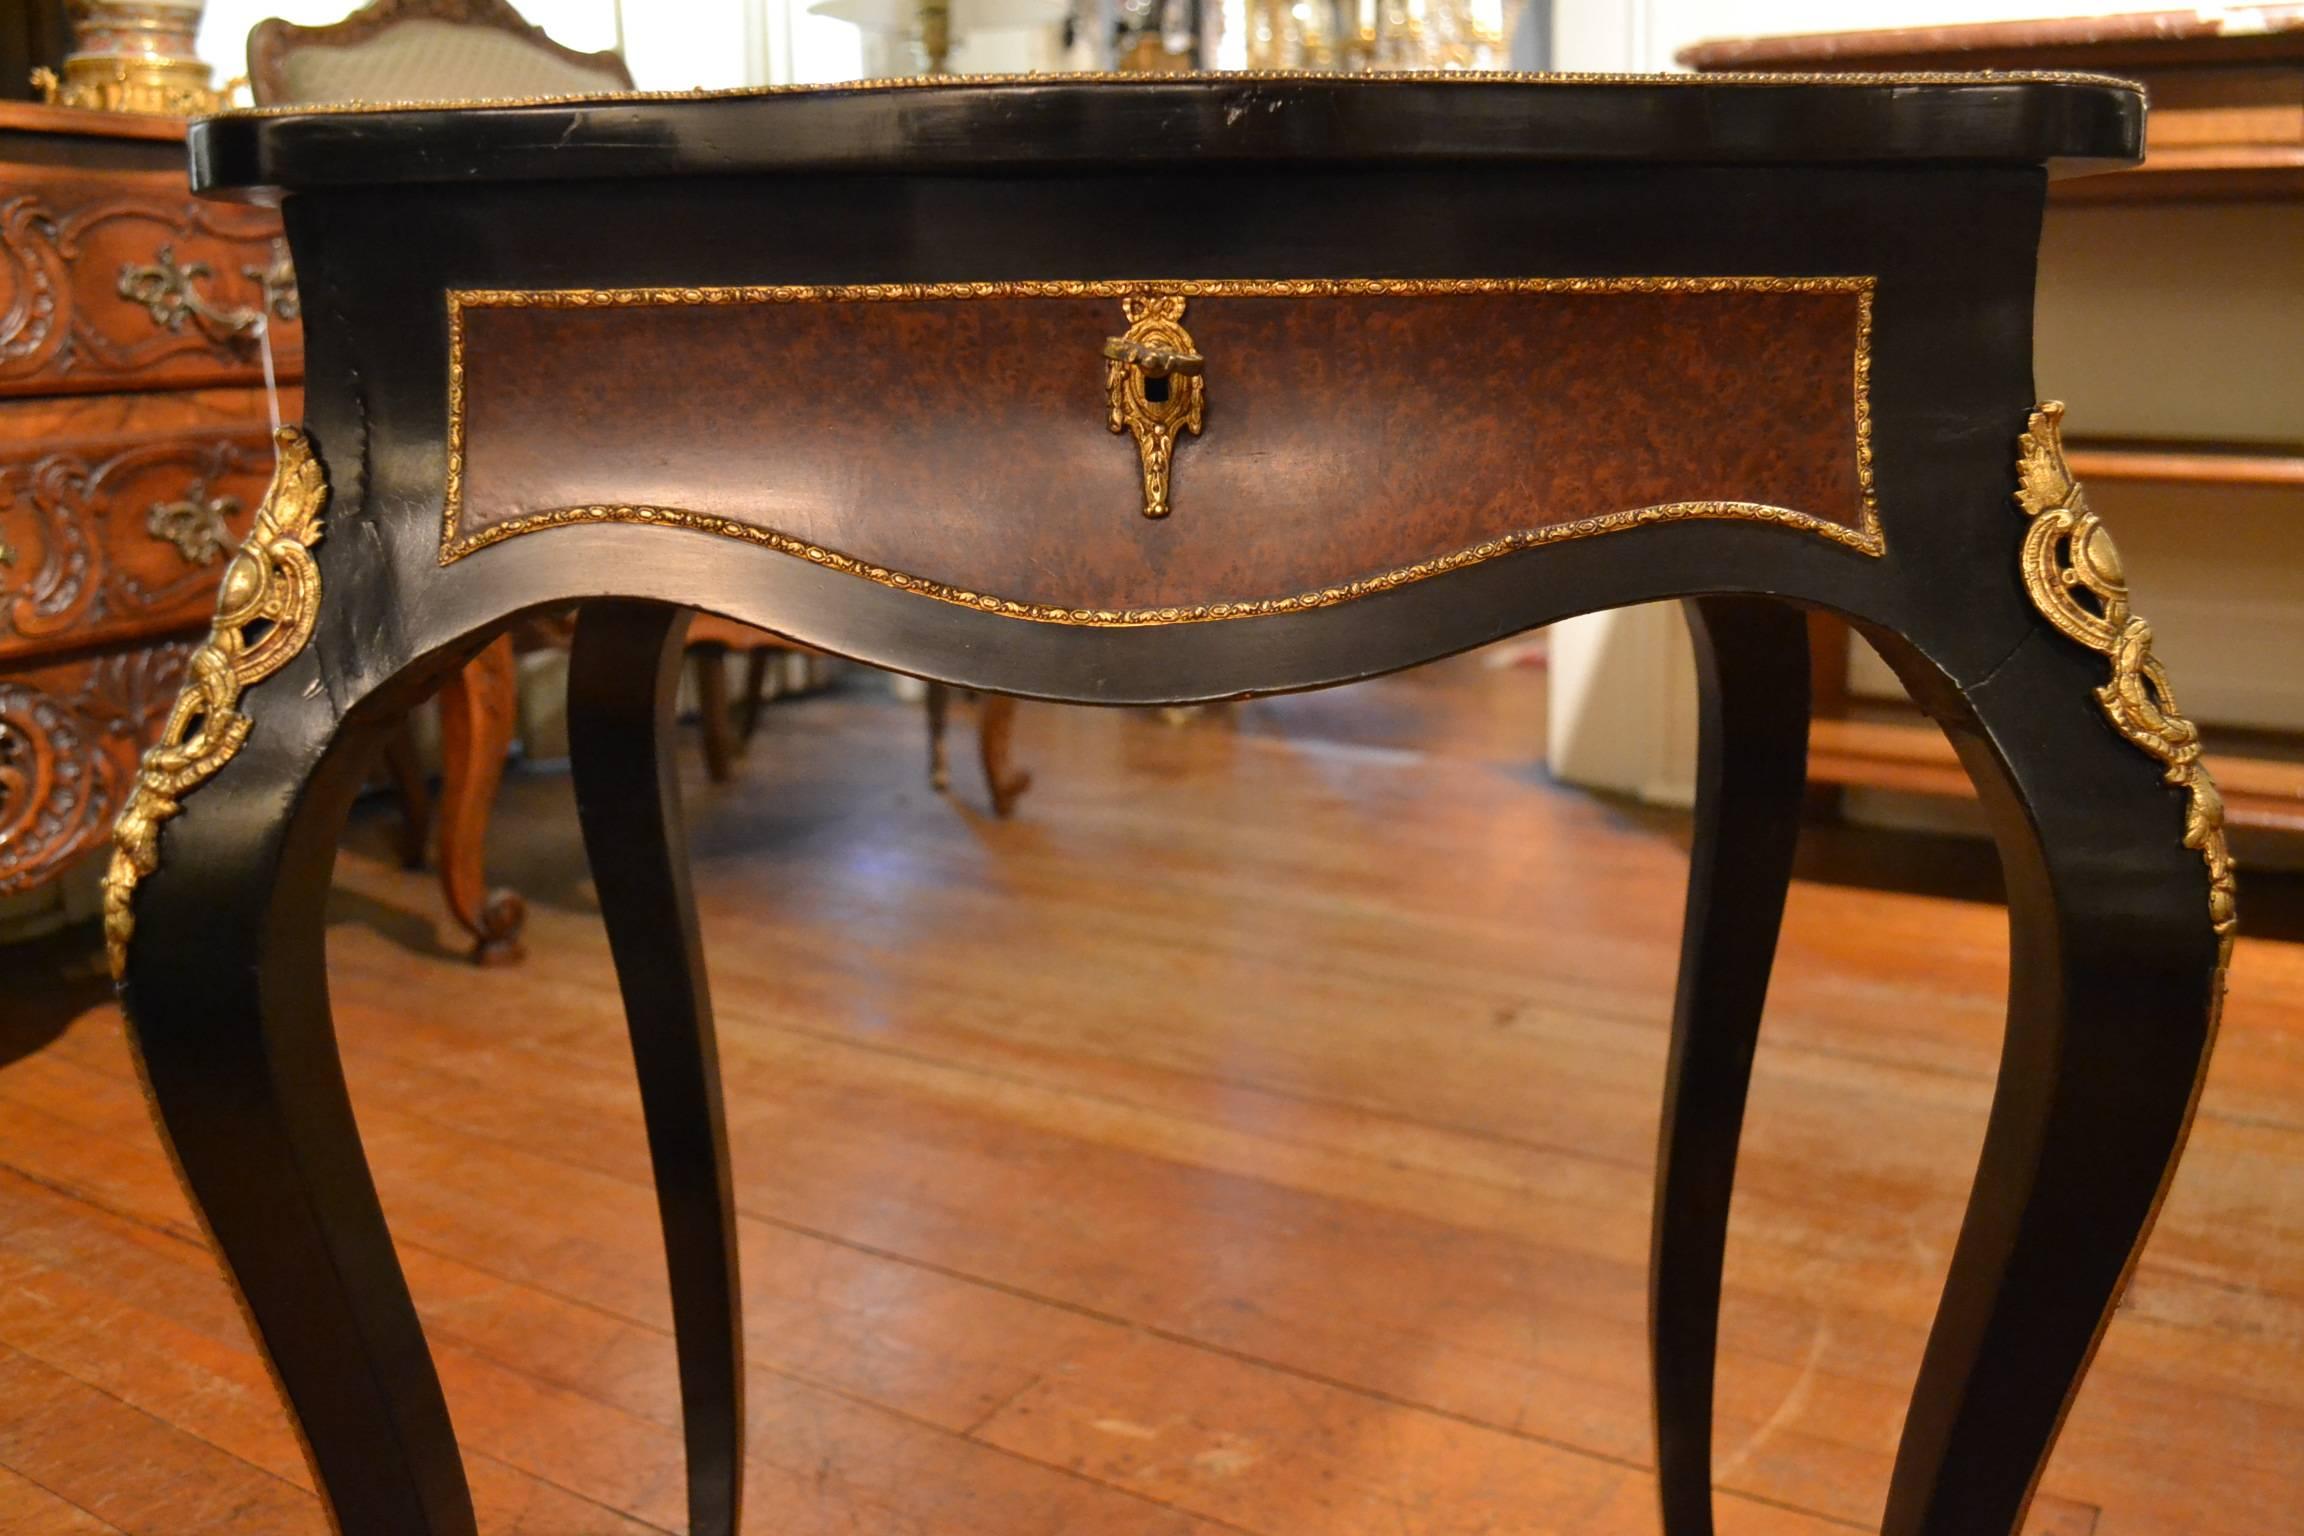 This inlaid dressing table is petite and beautifully made. It is a little jewel in its own right.